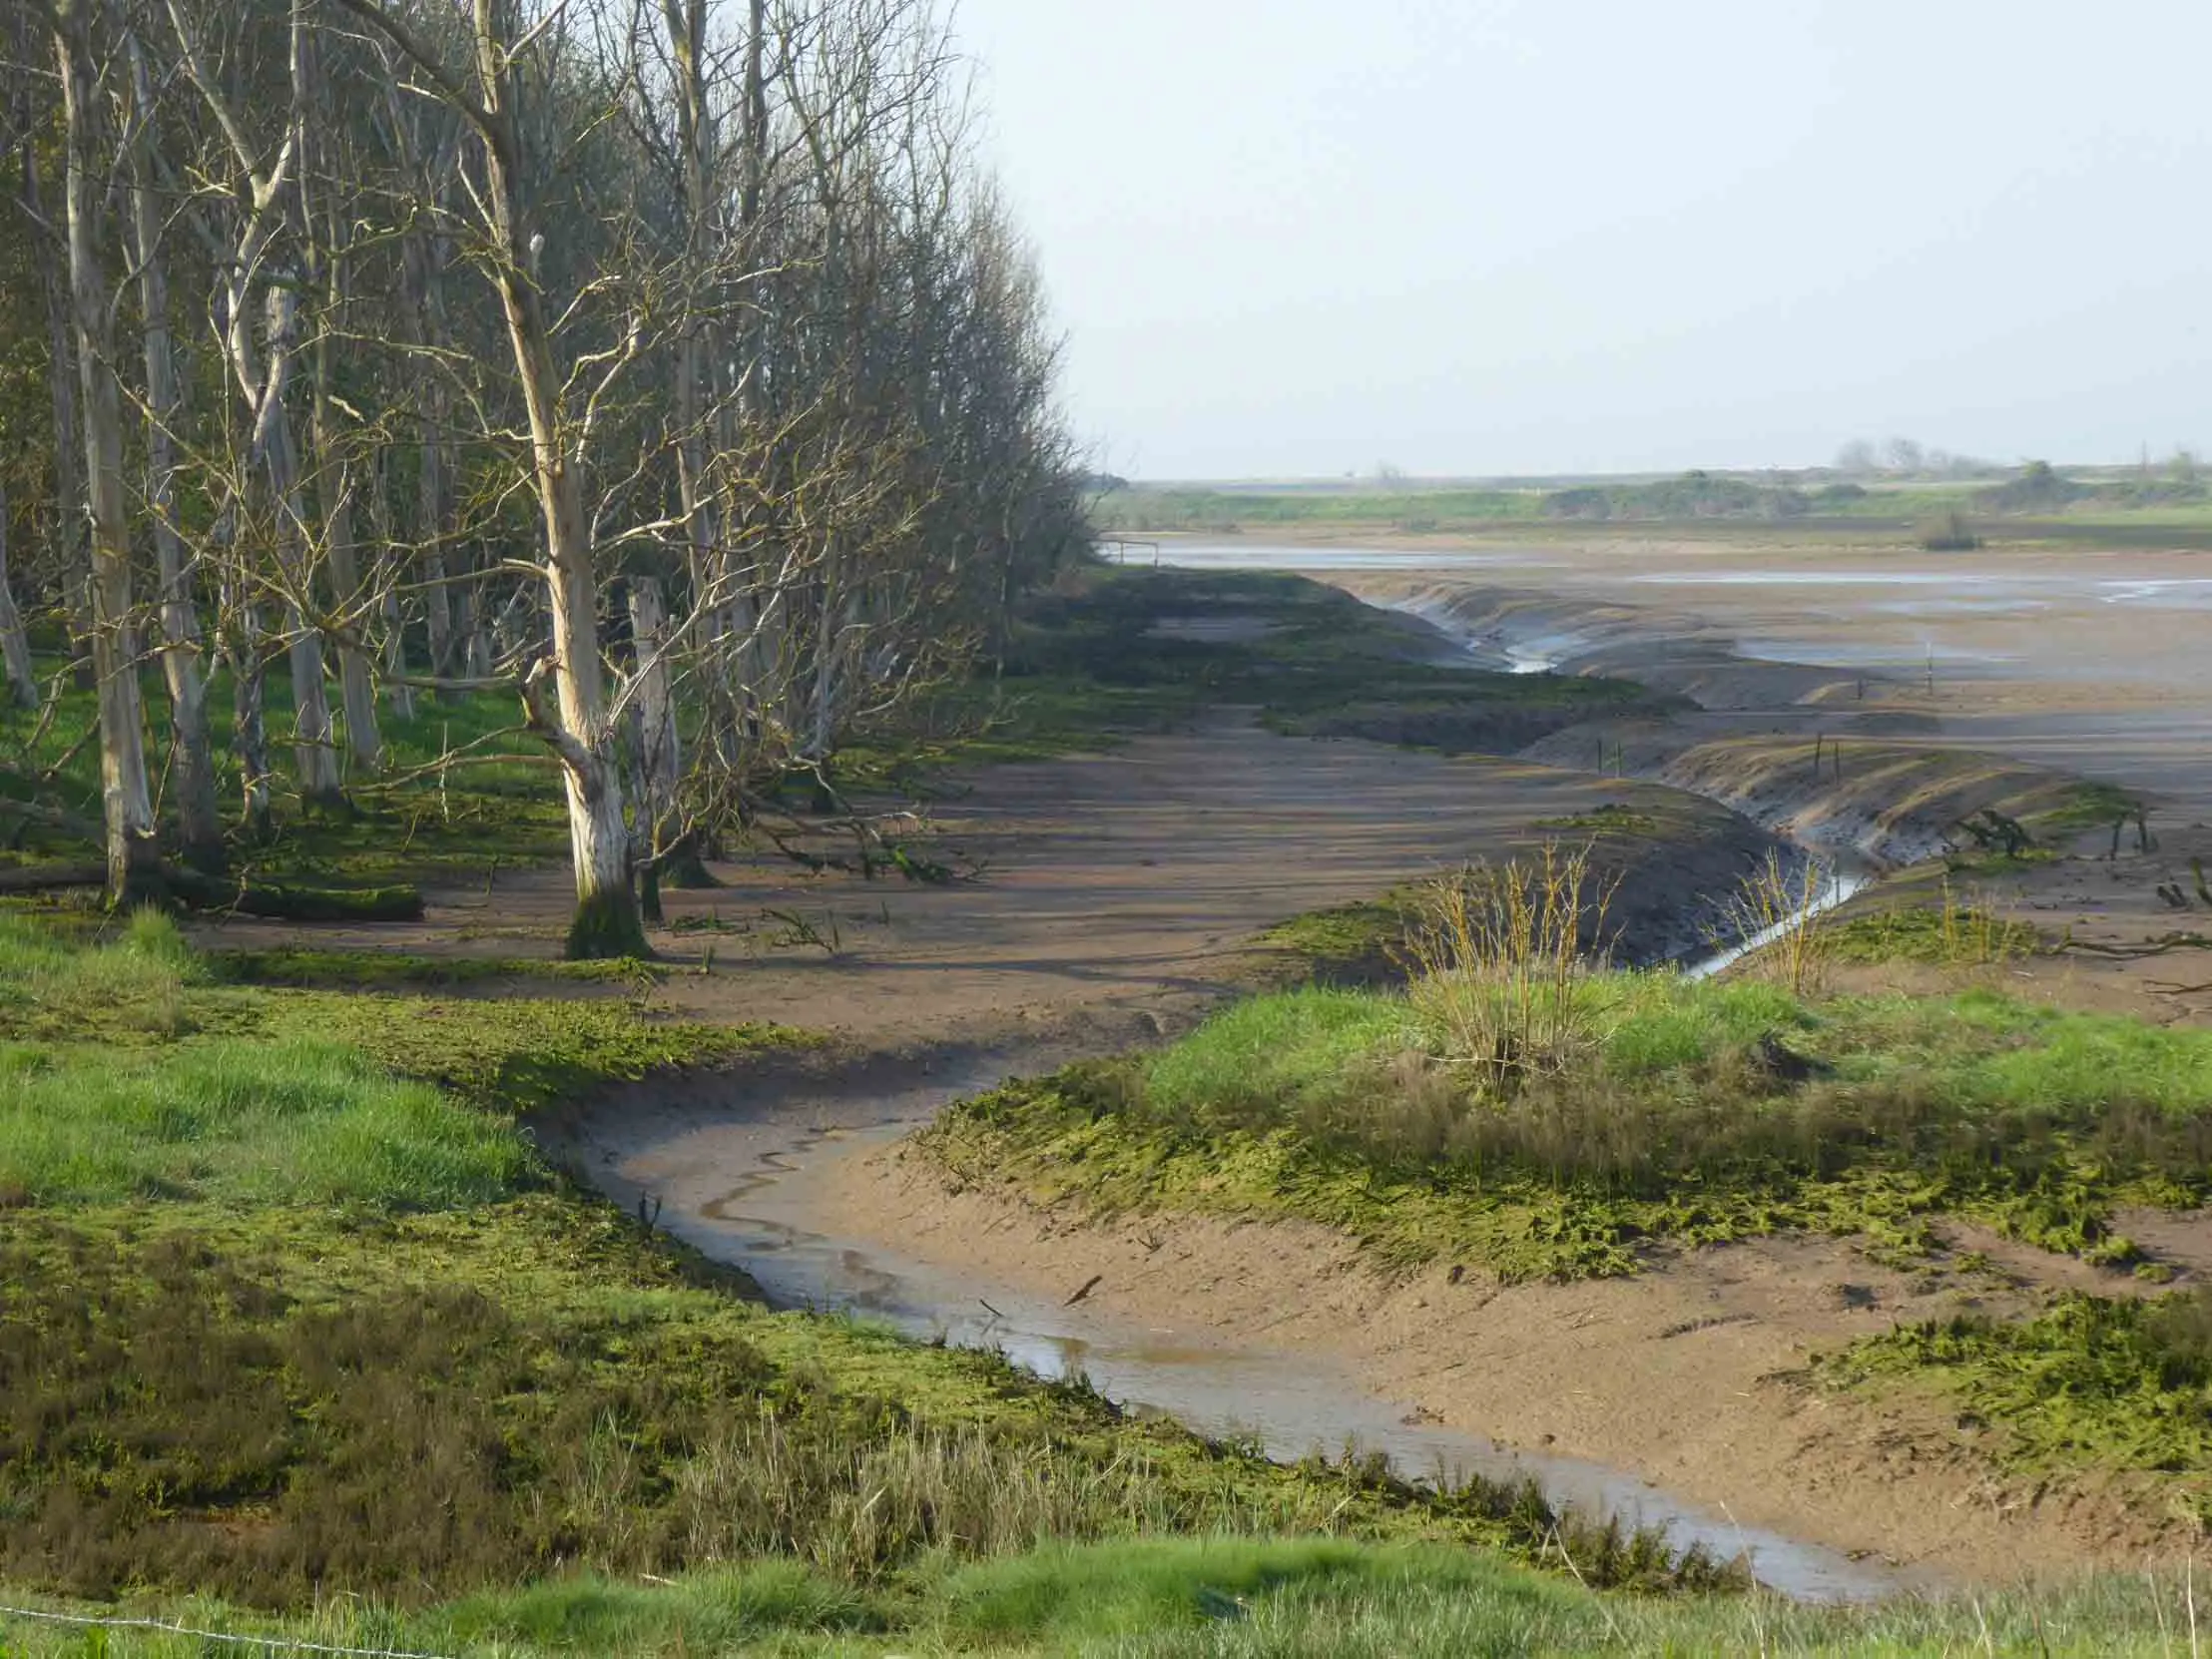 The view of the winding creek at Medmerry nature reserve. showing a mud path between grass banks with trees either side.